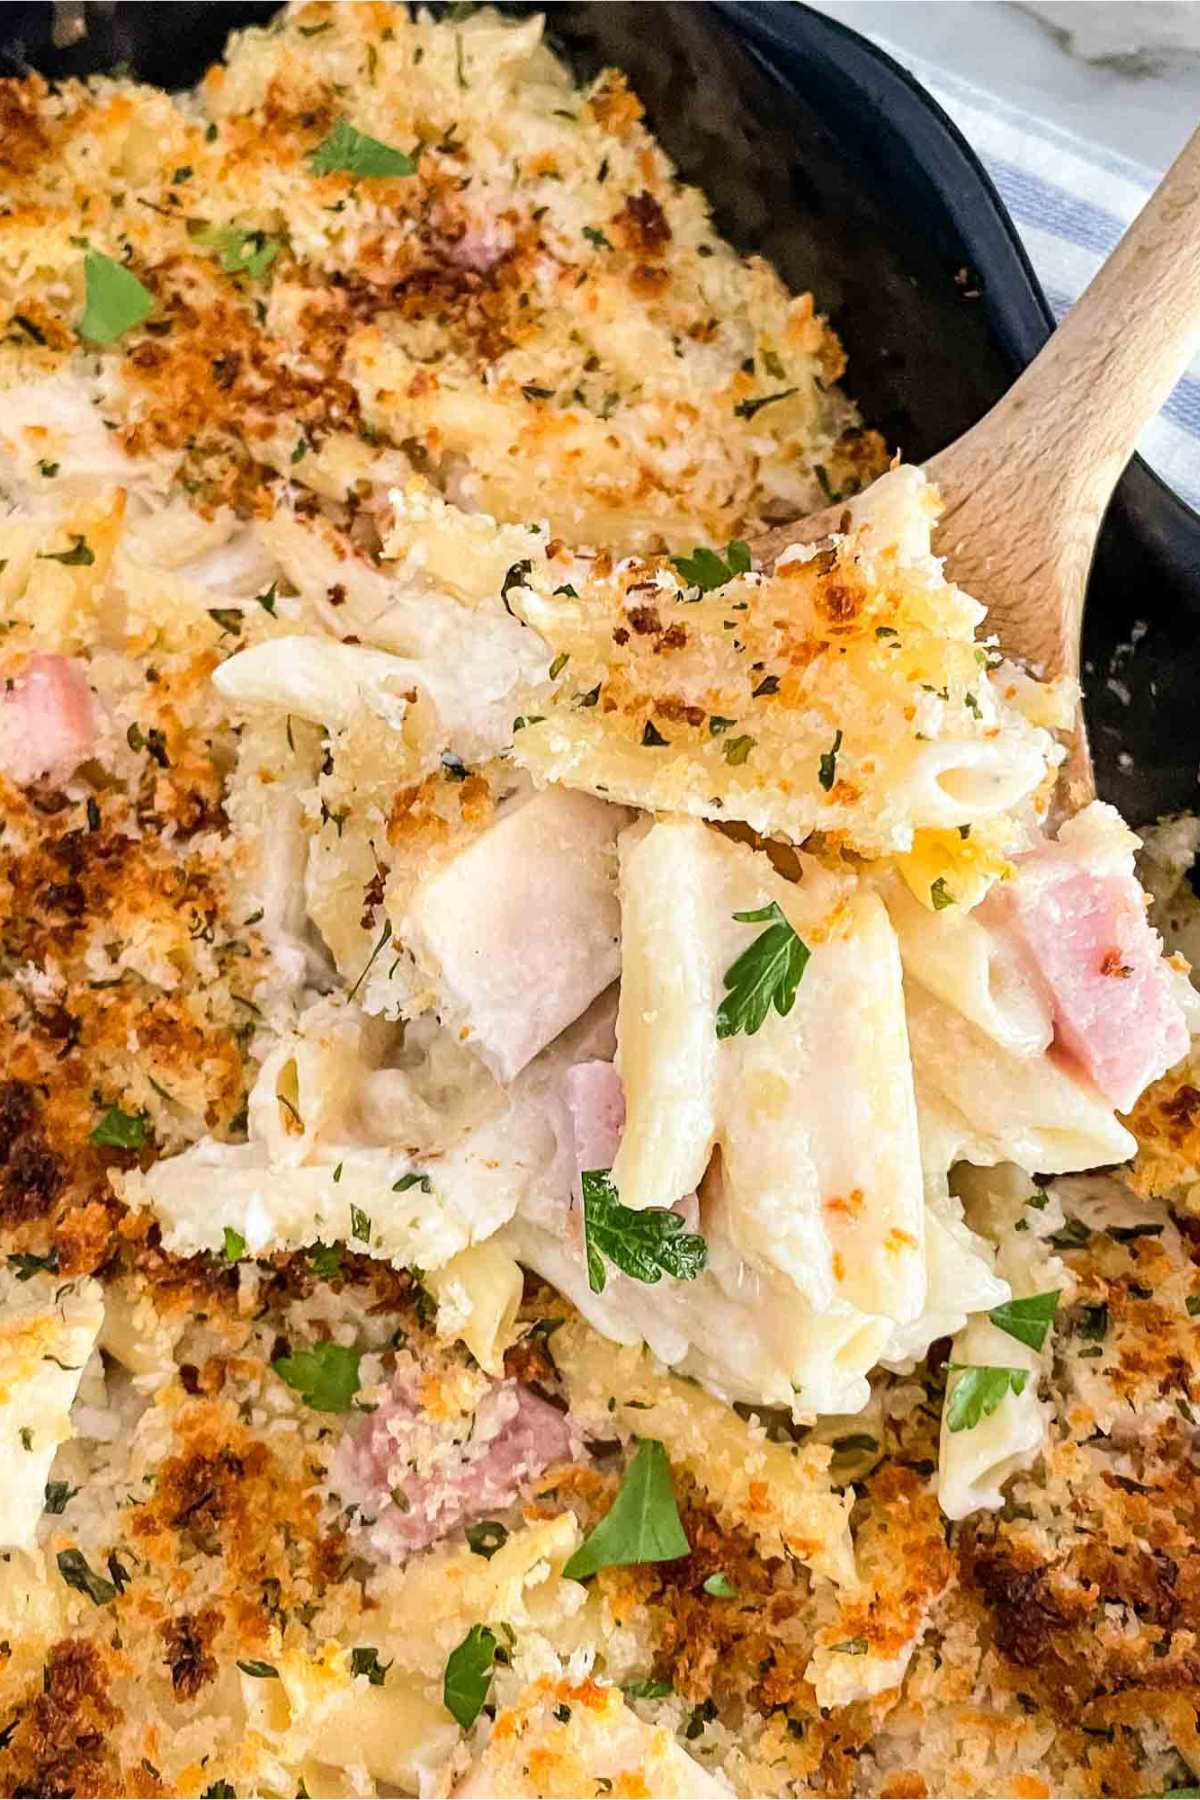 Chicken cordon bleu casserole pasta in a casserole dish with a wooden spoon scooping out a portion.